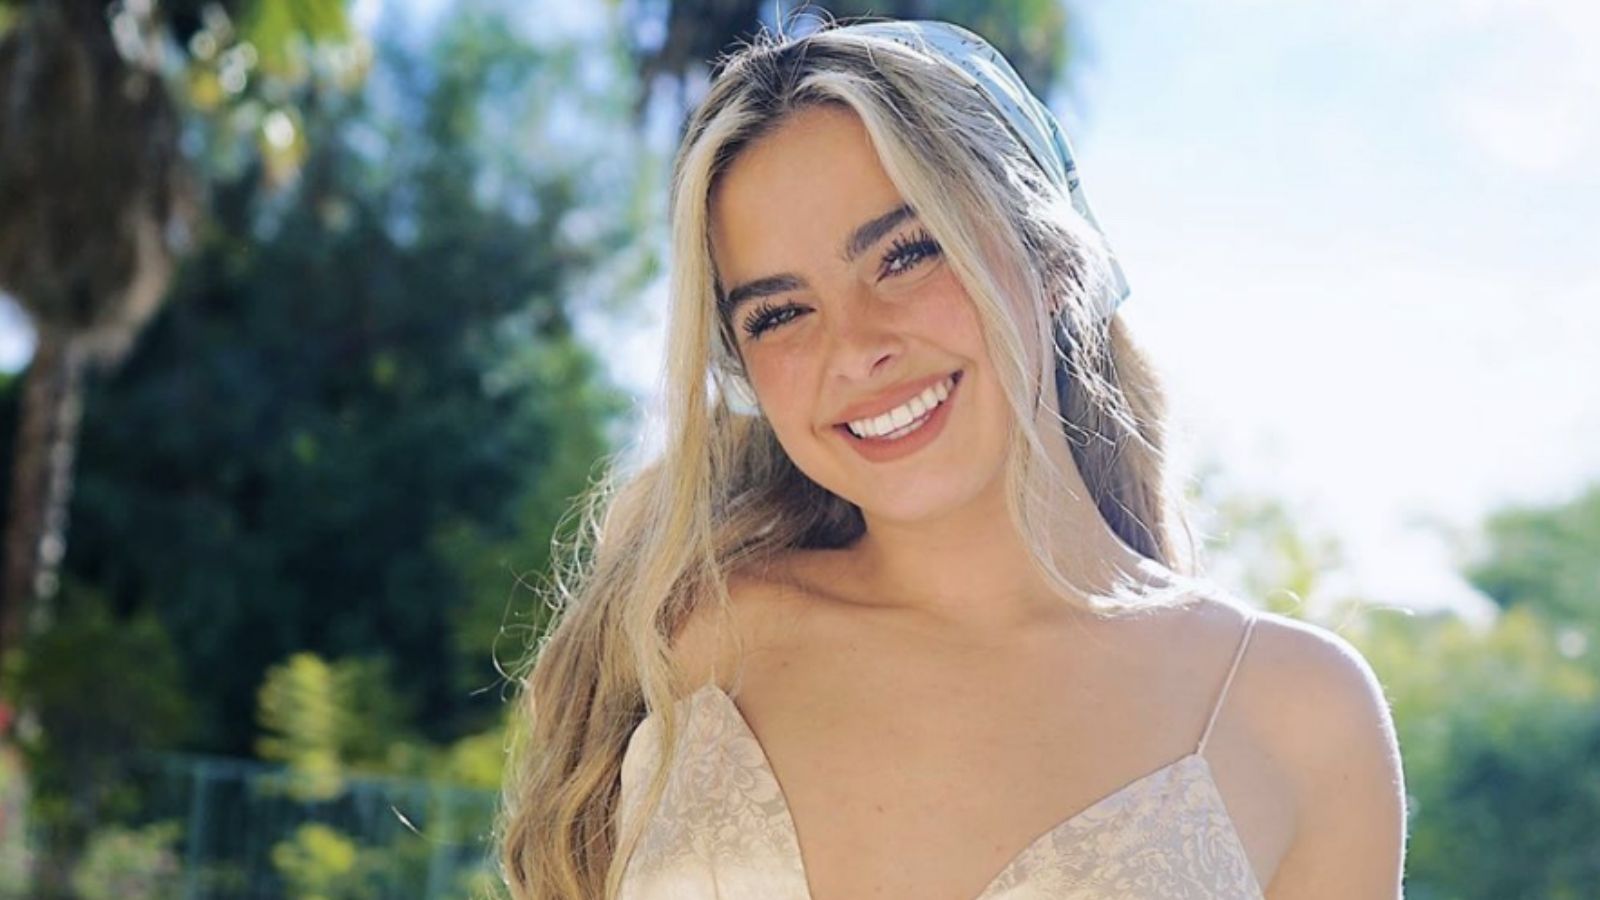 Who is Addison Rae? The Hype House star dominating TikTok